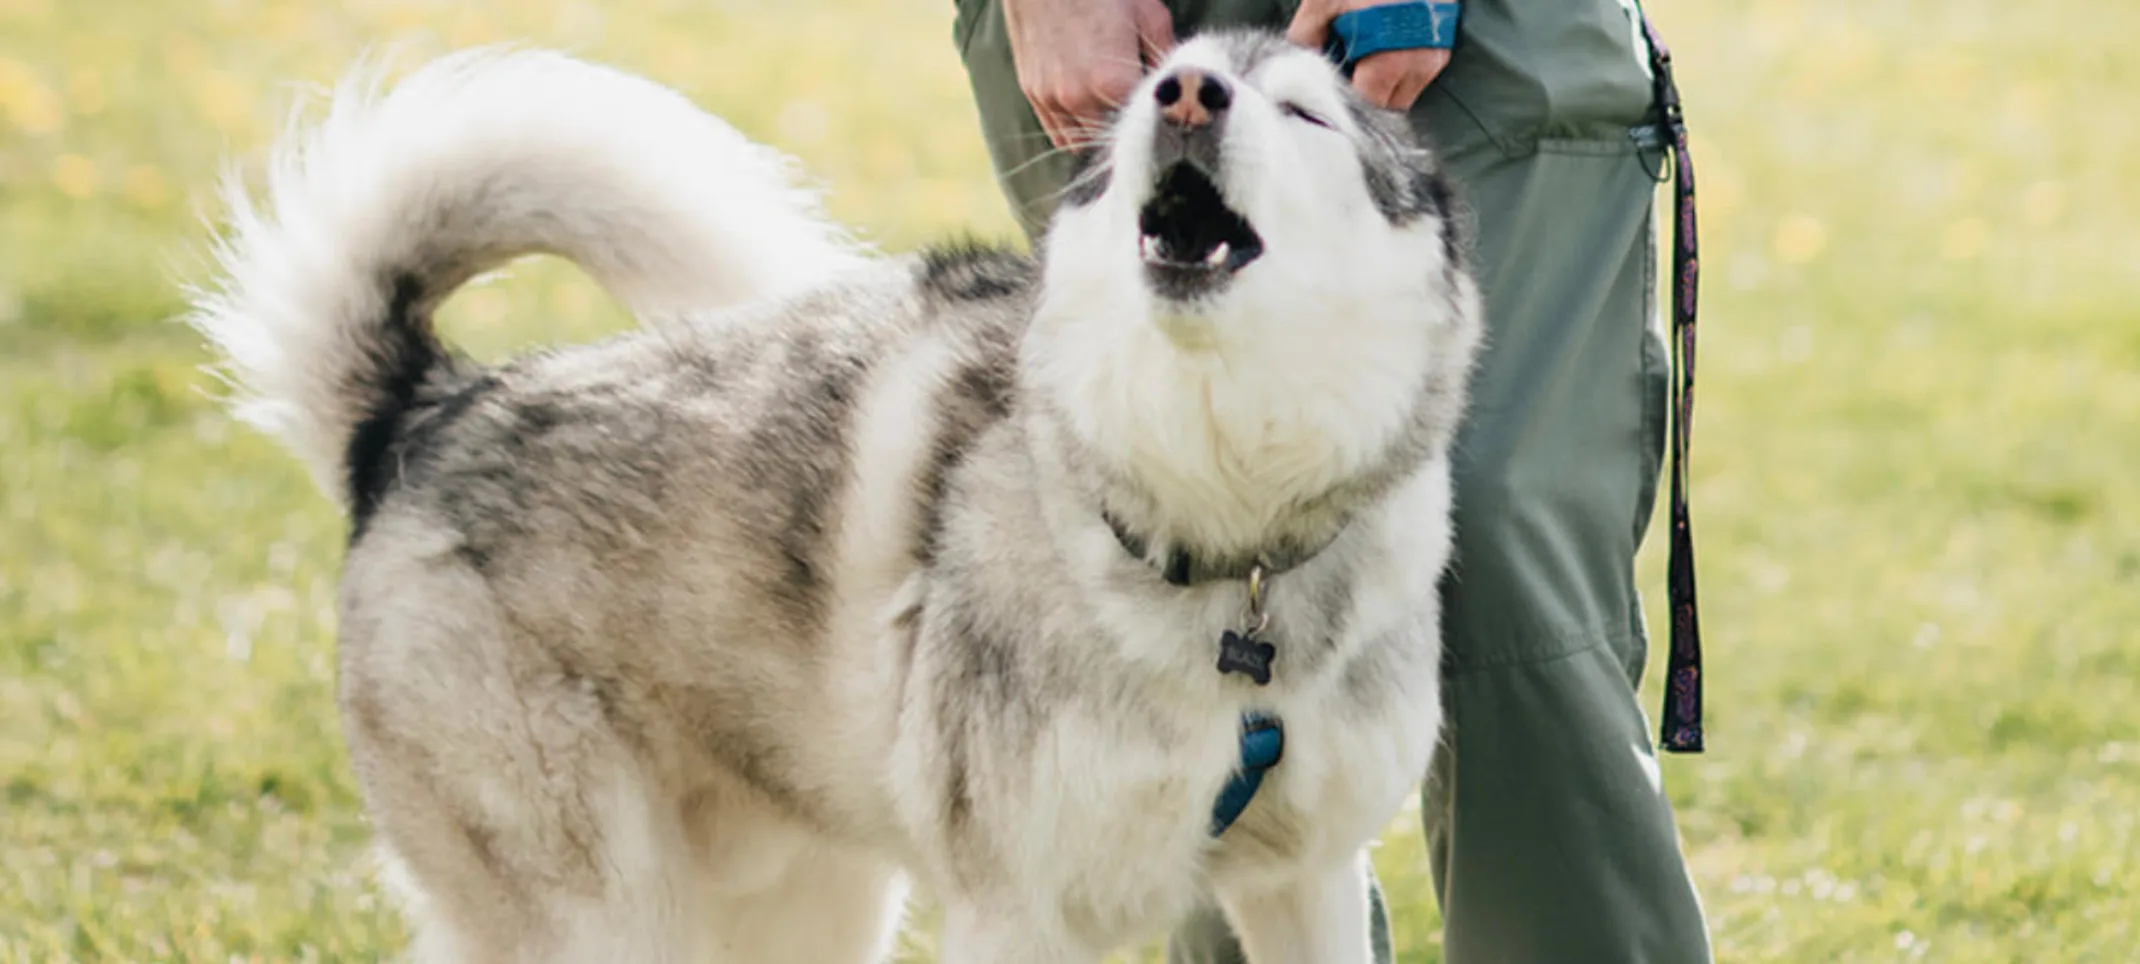 Husky dog howling while standing in front of a staff member